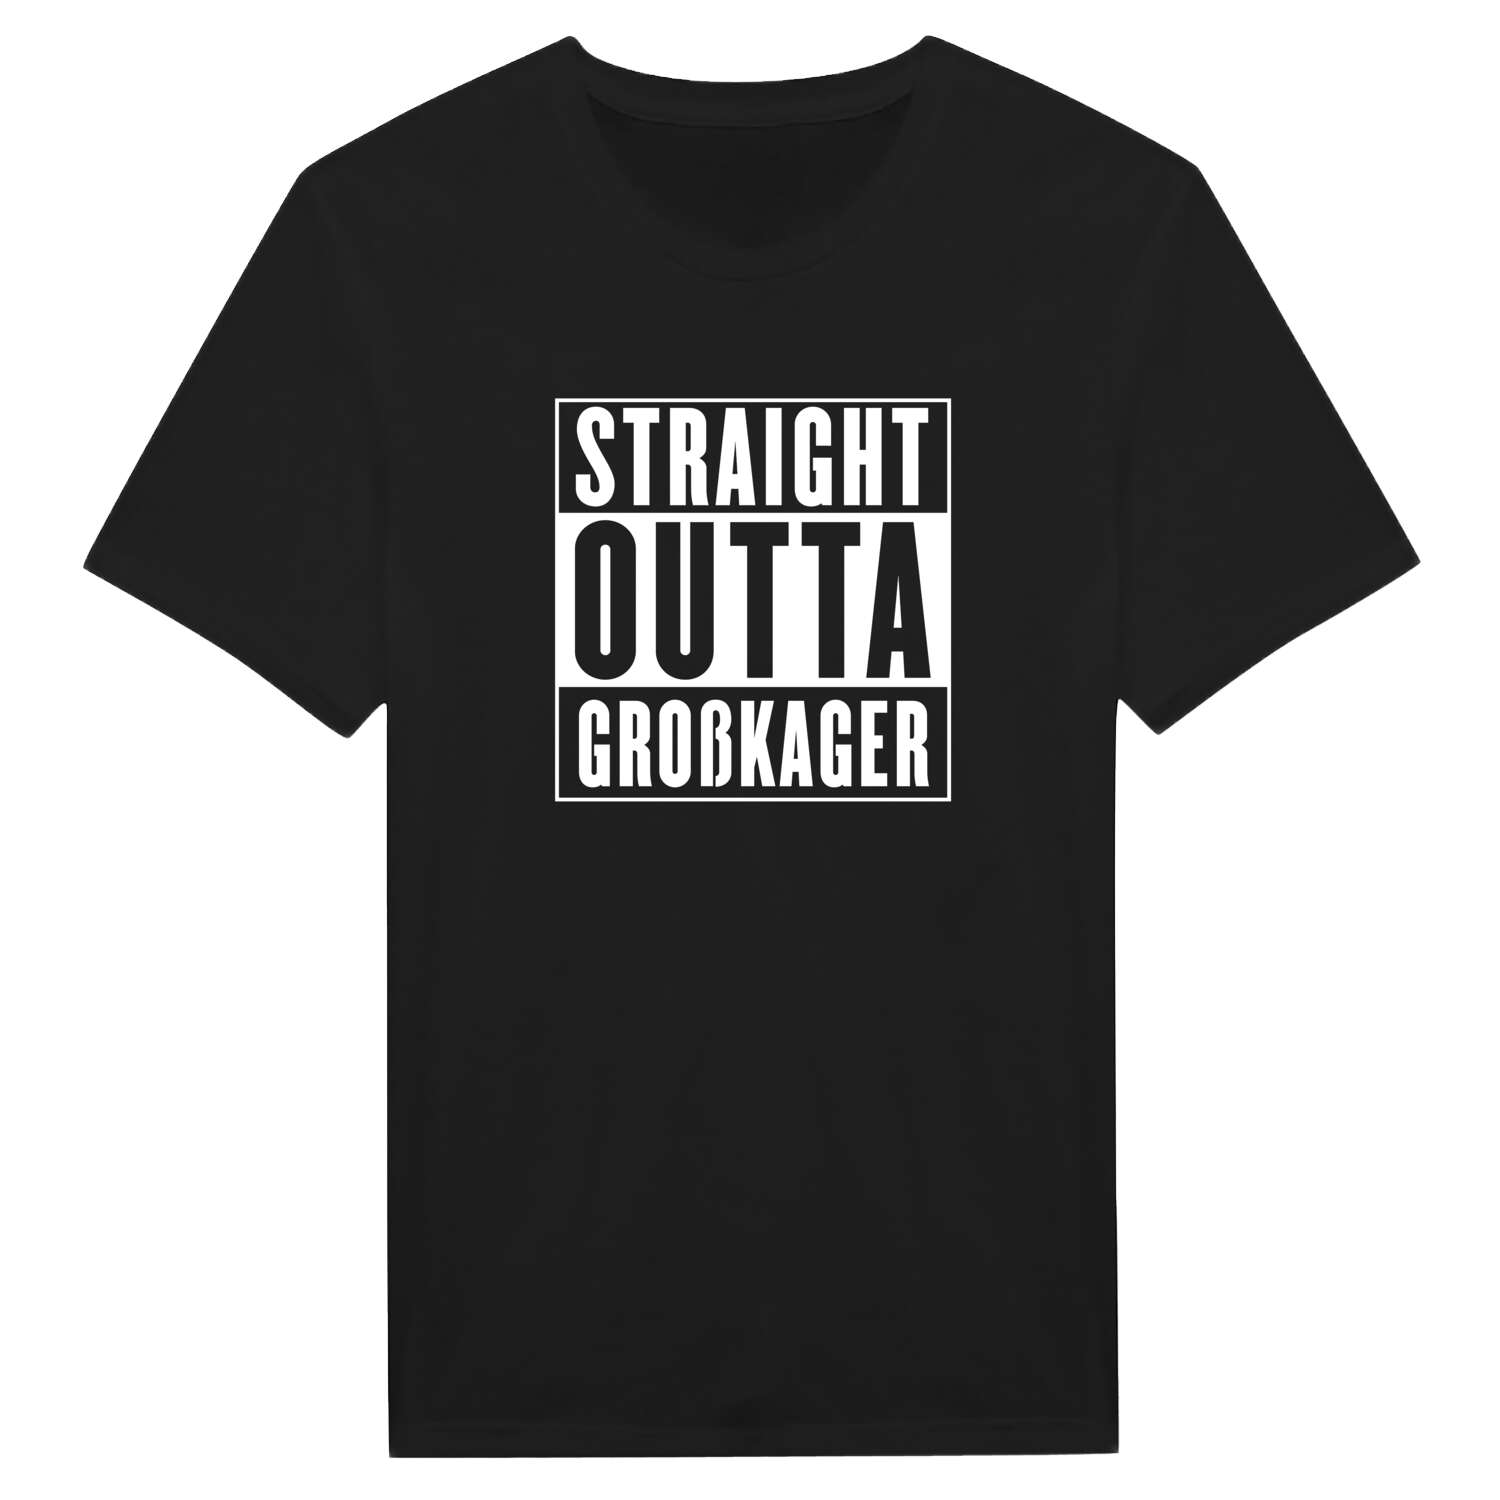 Großkager T-Shirt »Straight Outta«